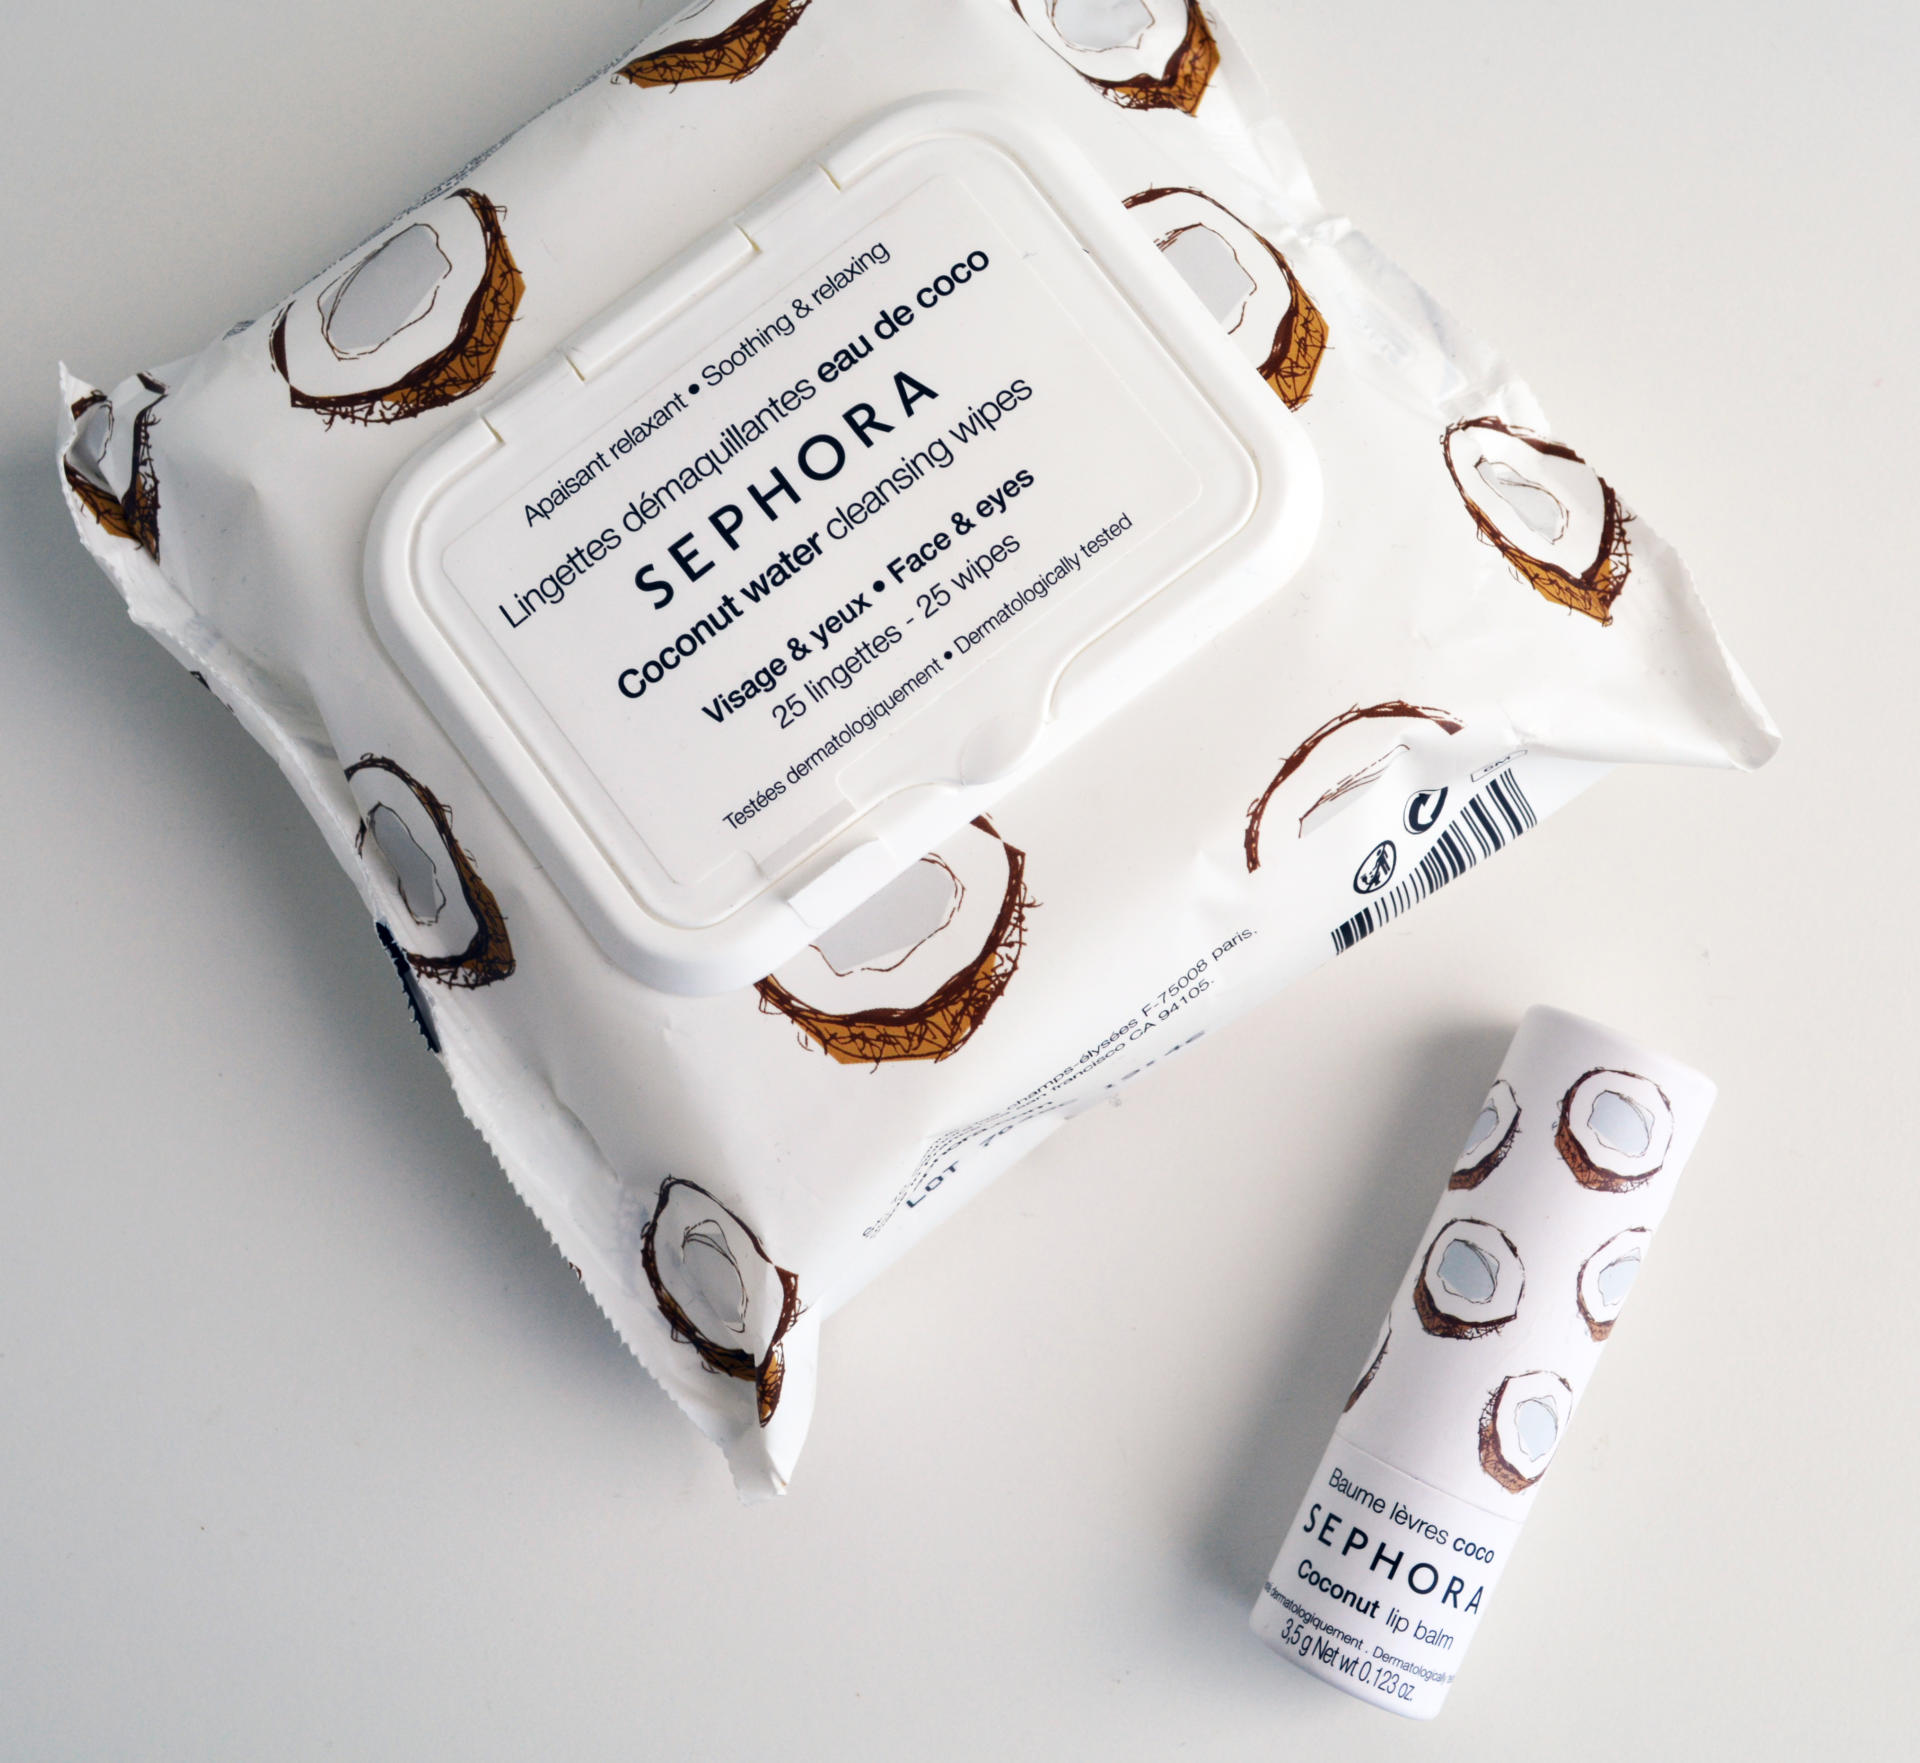 Sephora Cleansing & Exfoliating Wipes in Coconut Water